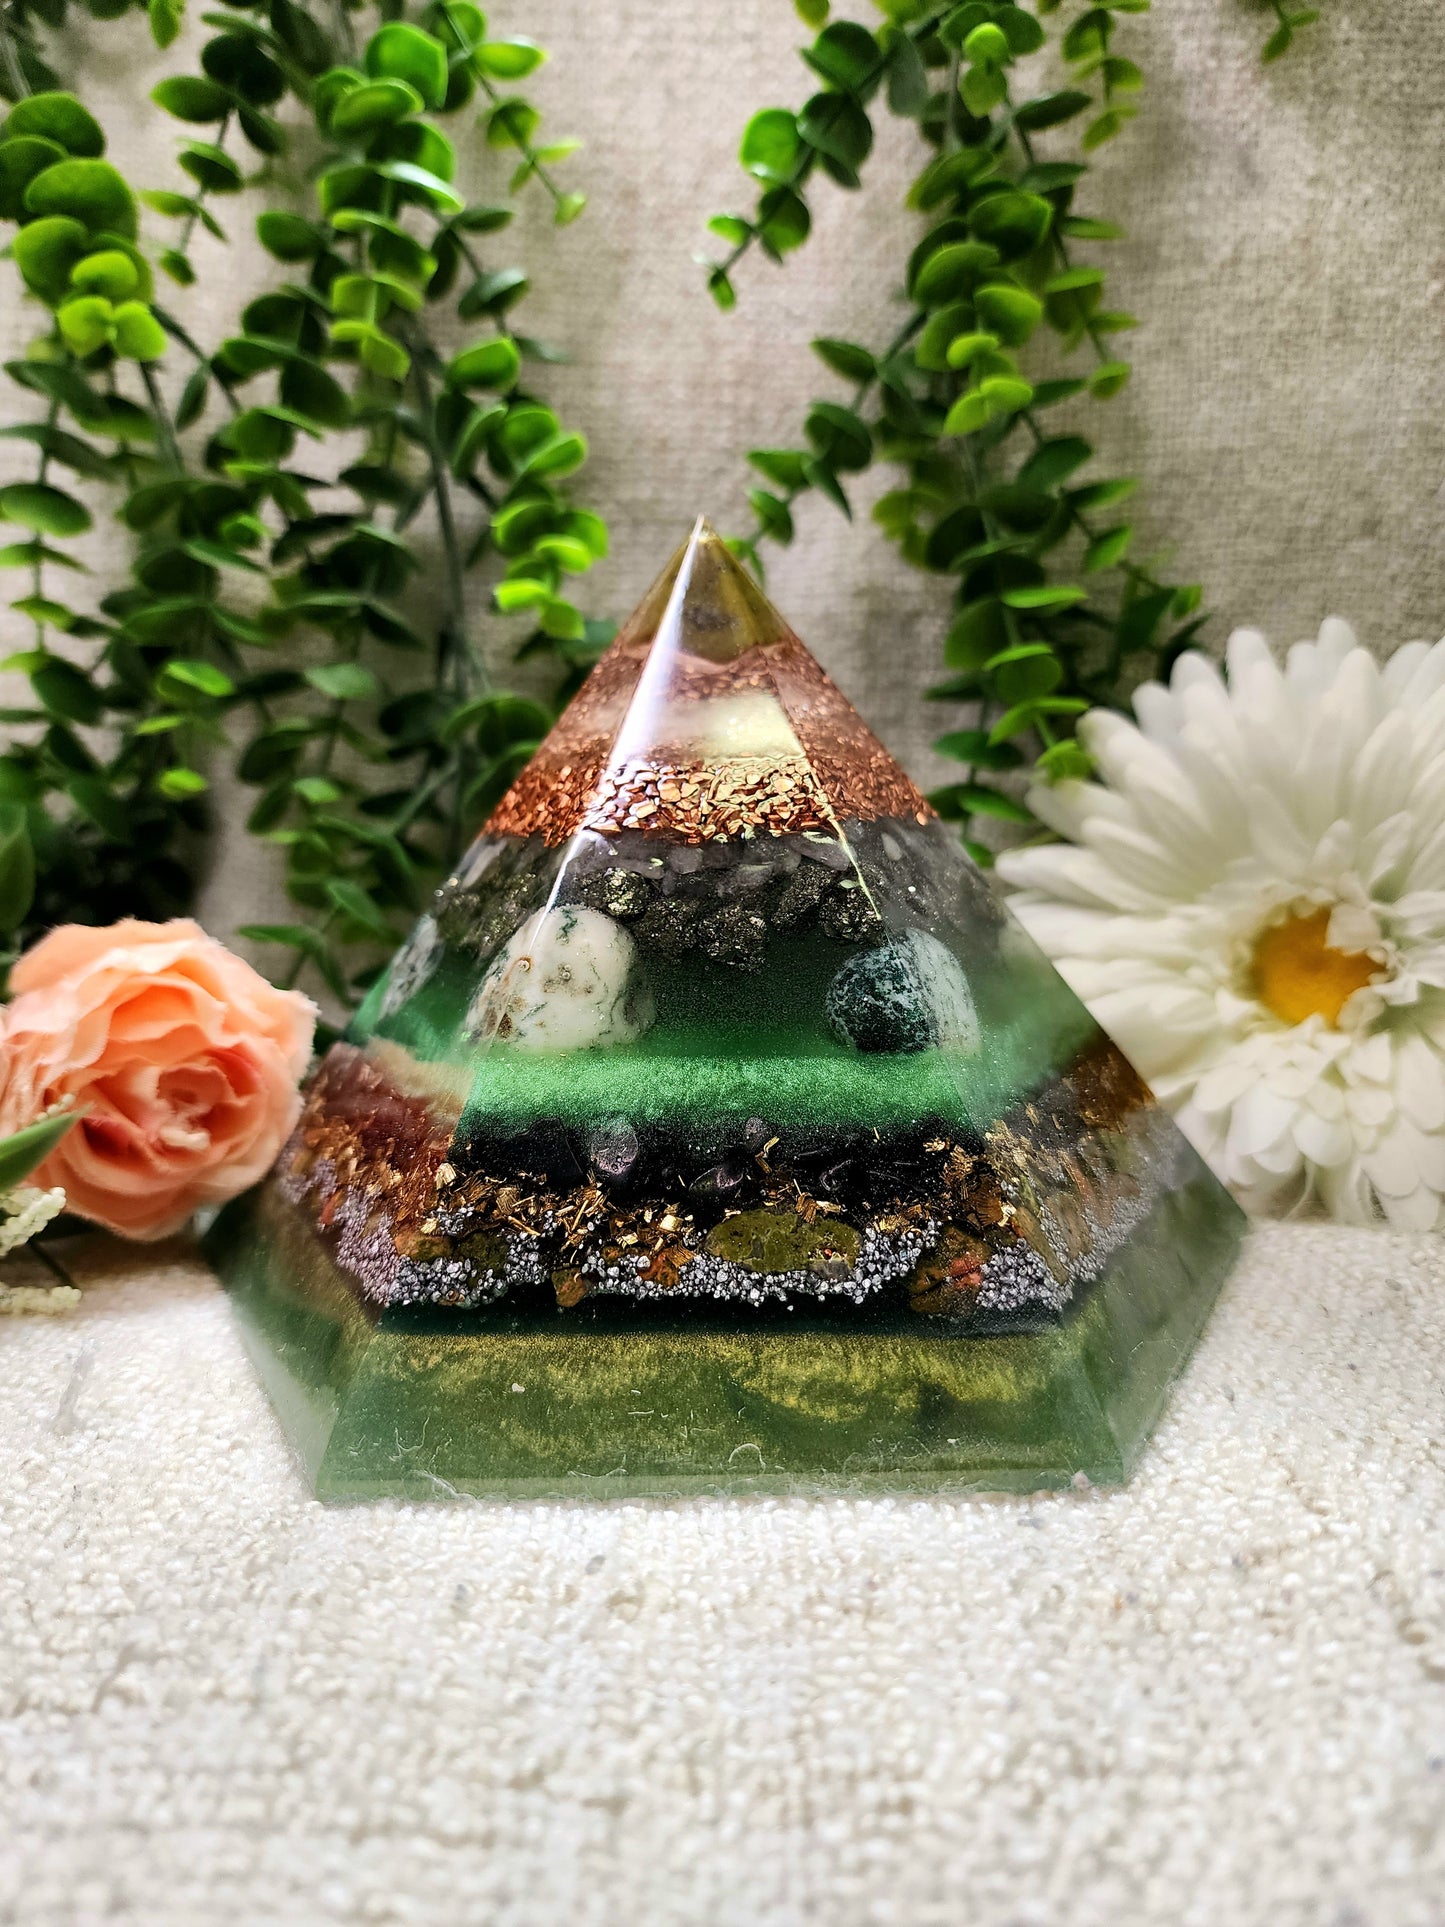 SPRING EQUINOX - Special Edition Hexagonal Pyramid! - EMF Protector - Green Opal, Morganite, Pyrite, Tree Agate, Shungite and Unakite with Copper, Brass and Aluminum Metals